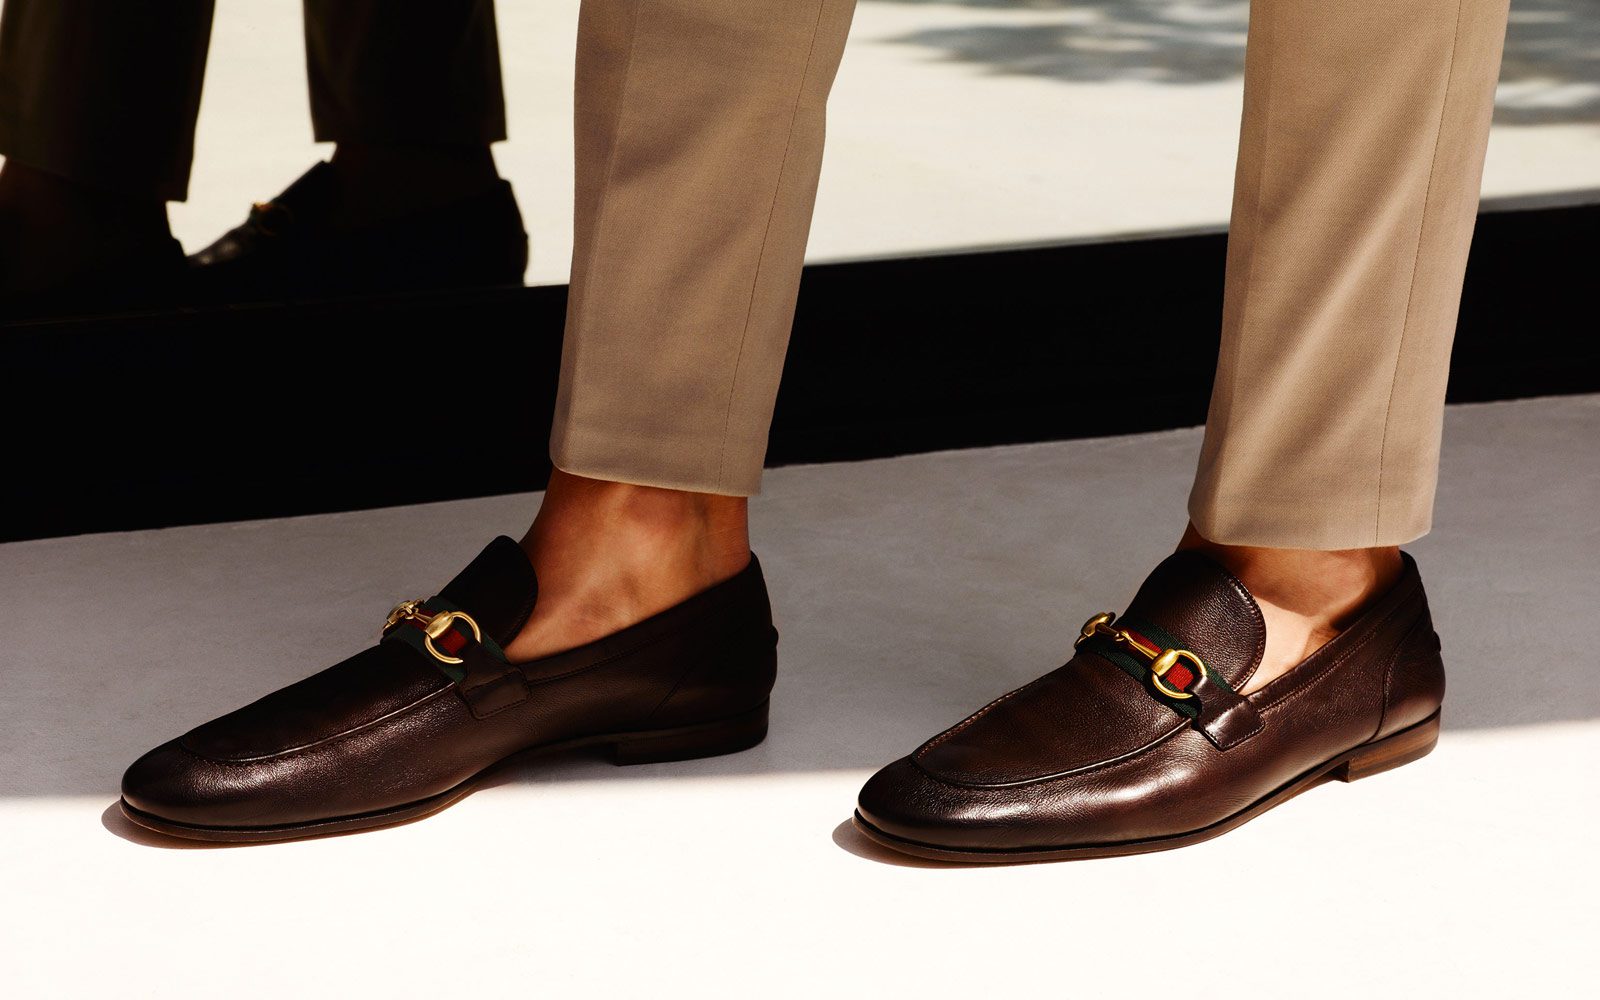 gucci loafers with suit